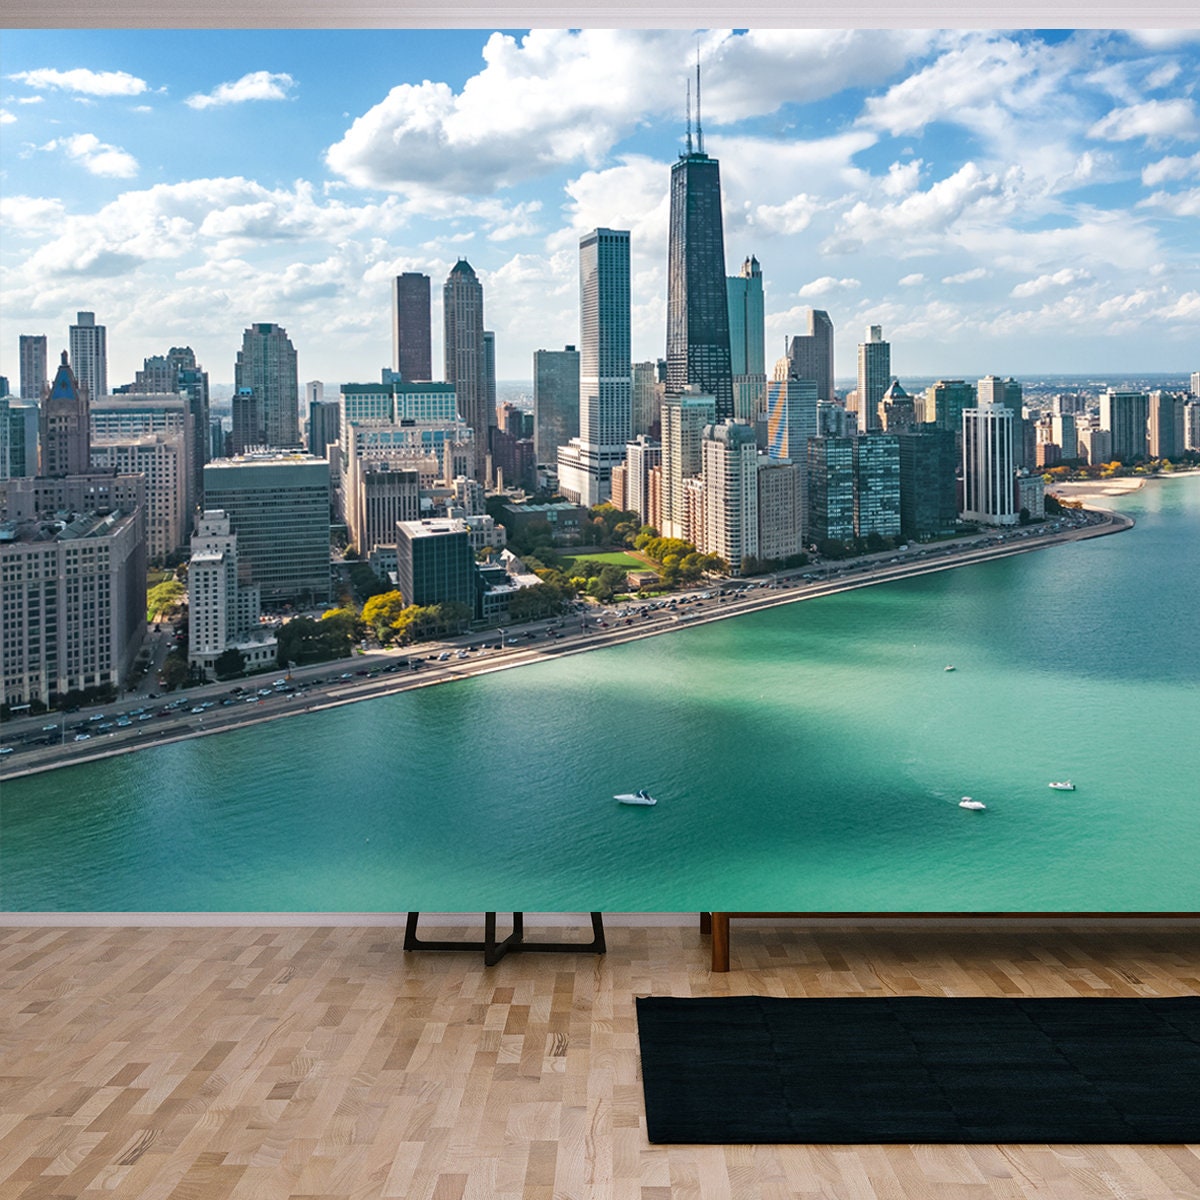 Chicago Skyline, Lake Michigan and City of Chicago Downtown Skyscrapers Cityscape, Illinois, USA Wallpaper Living Room Mural